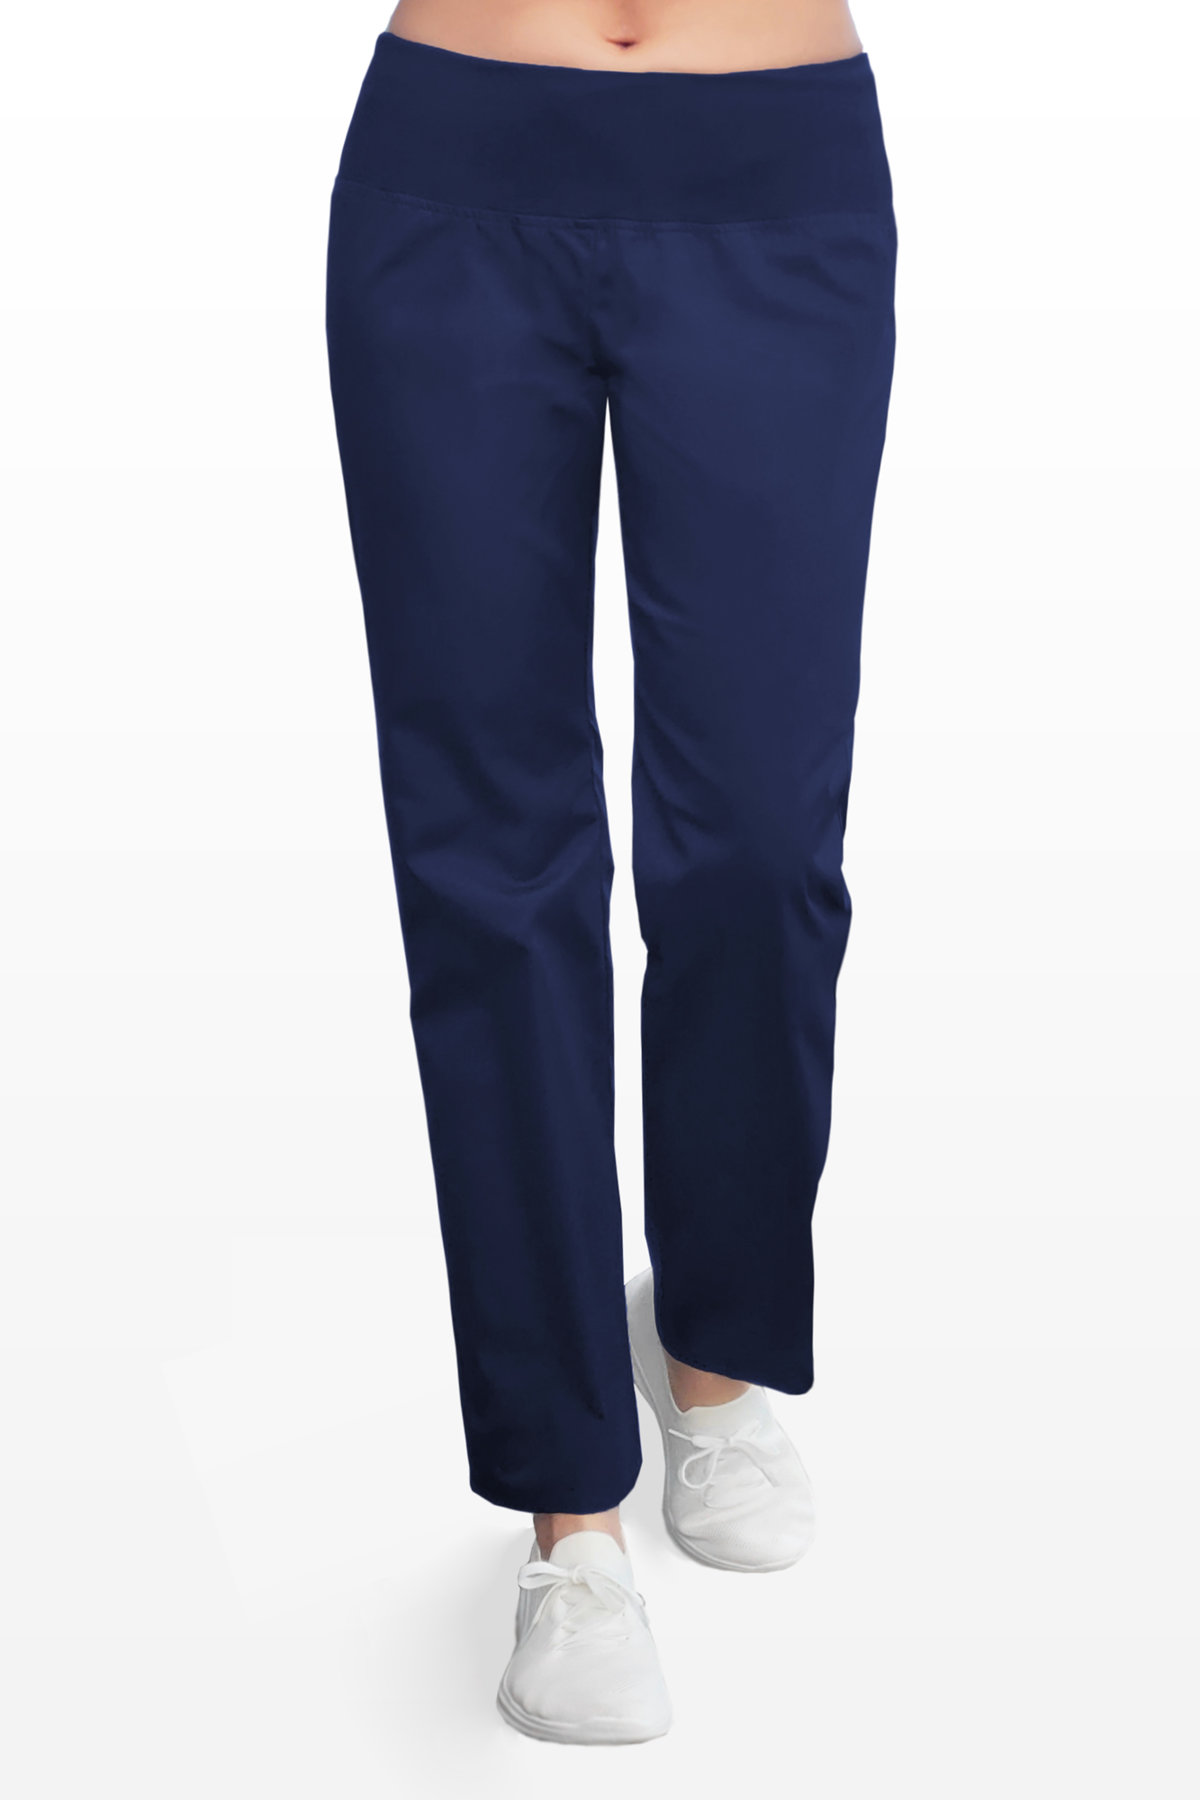 https://colormed.pl/eng_pl_Scrubs-pants-with-an-elastic-band-SC3-G-navy-blue-395_1.jpg